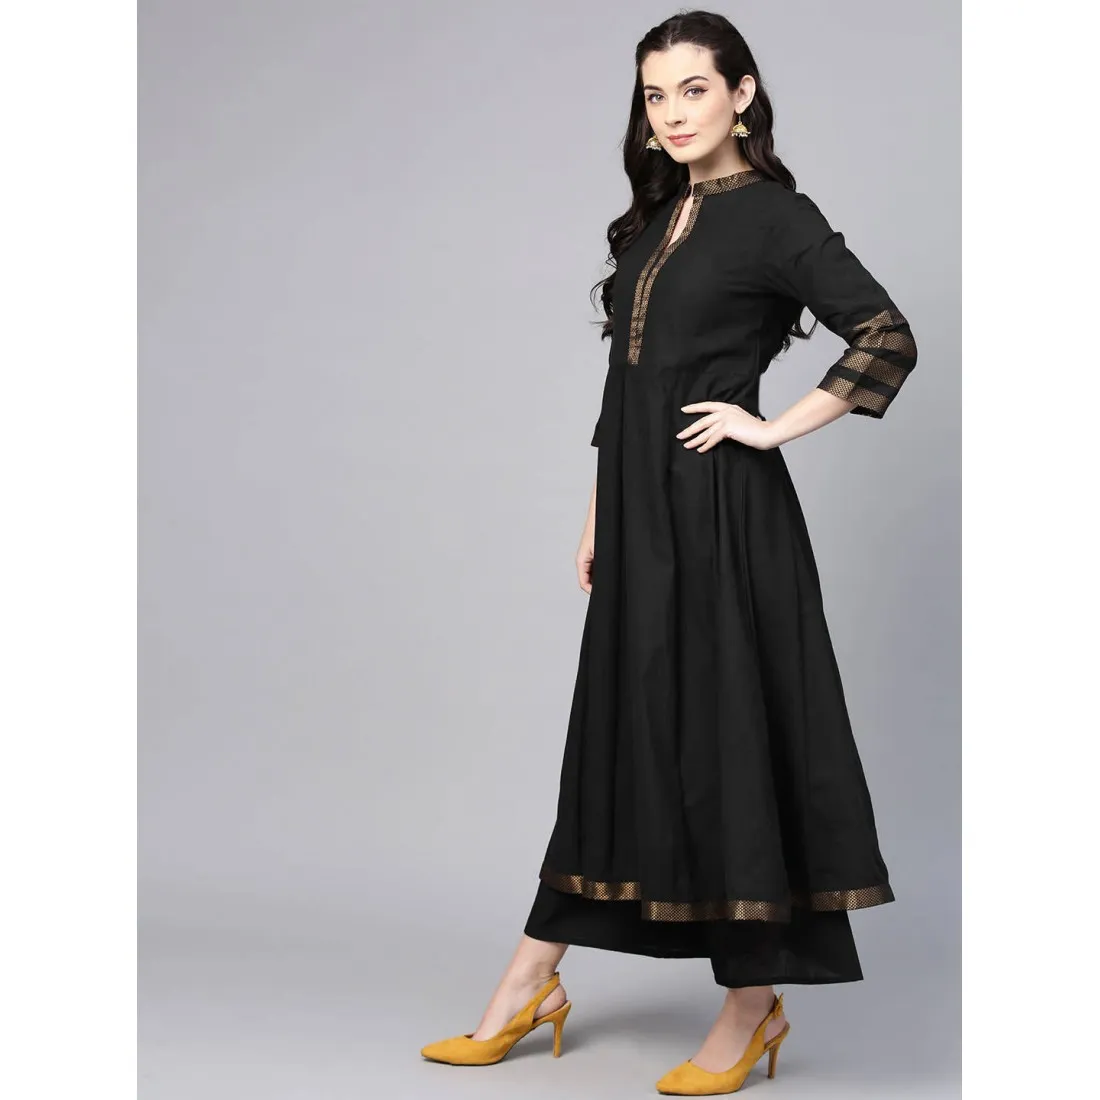 Fancy Formal wear Kurti Palazzo set at Rs.800/Piece in bangalore offer by  Flairmart Online Services Private Limited